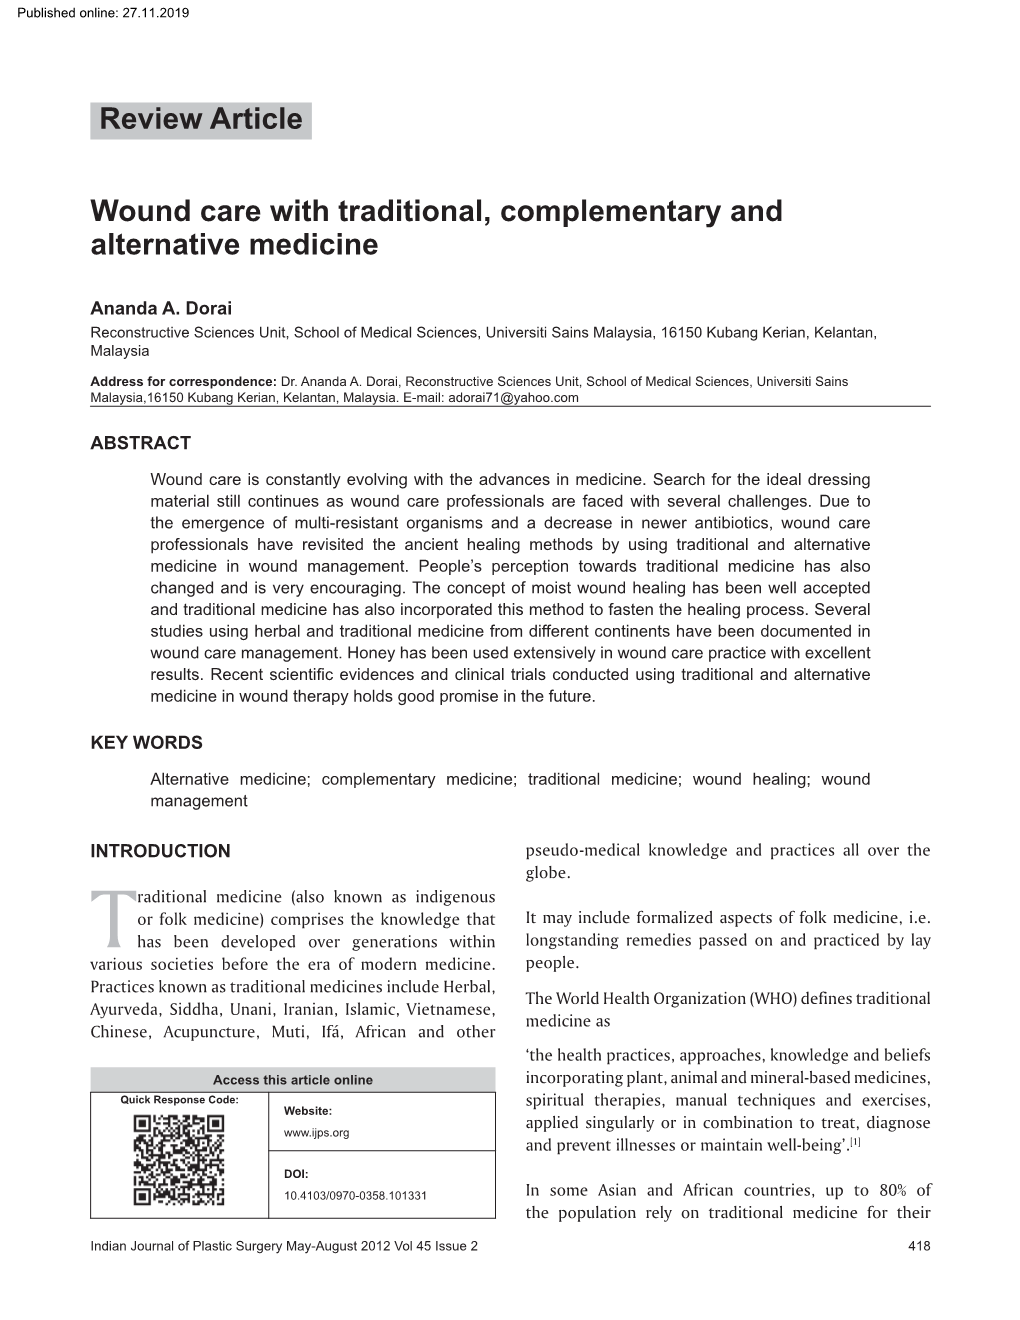 Review Article Wound Care with Traditional, Complementary And